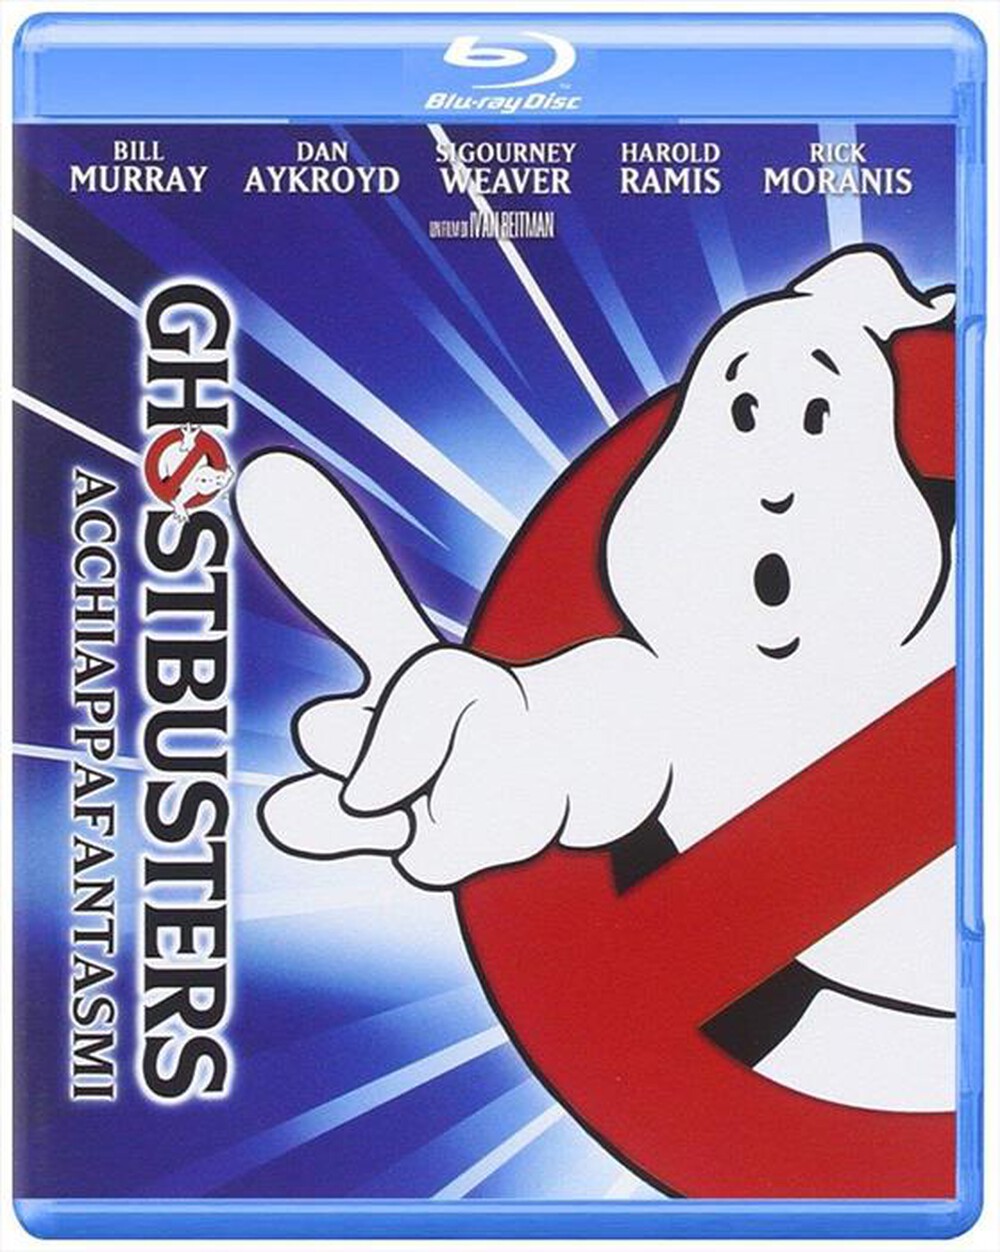 "UNIVERSAL PICTURES - Ghostbusters - Acchiappafantasmi"